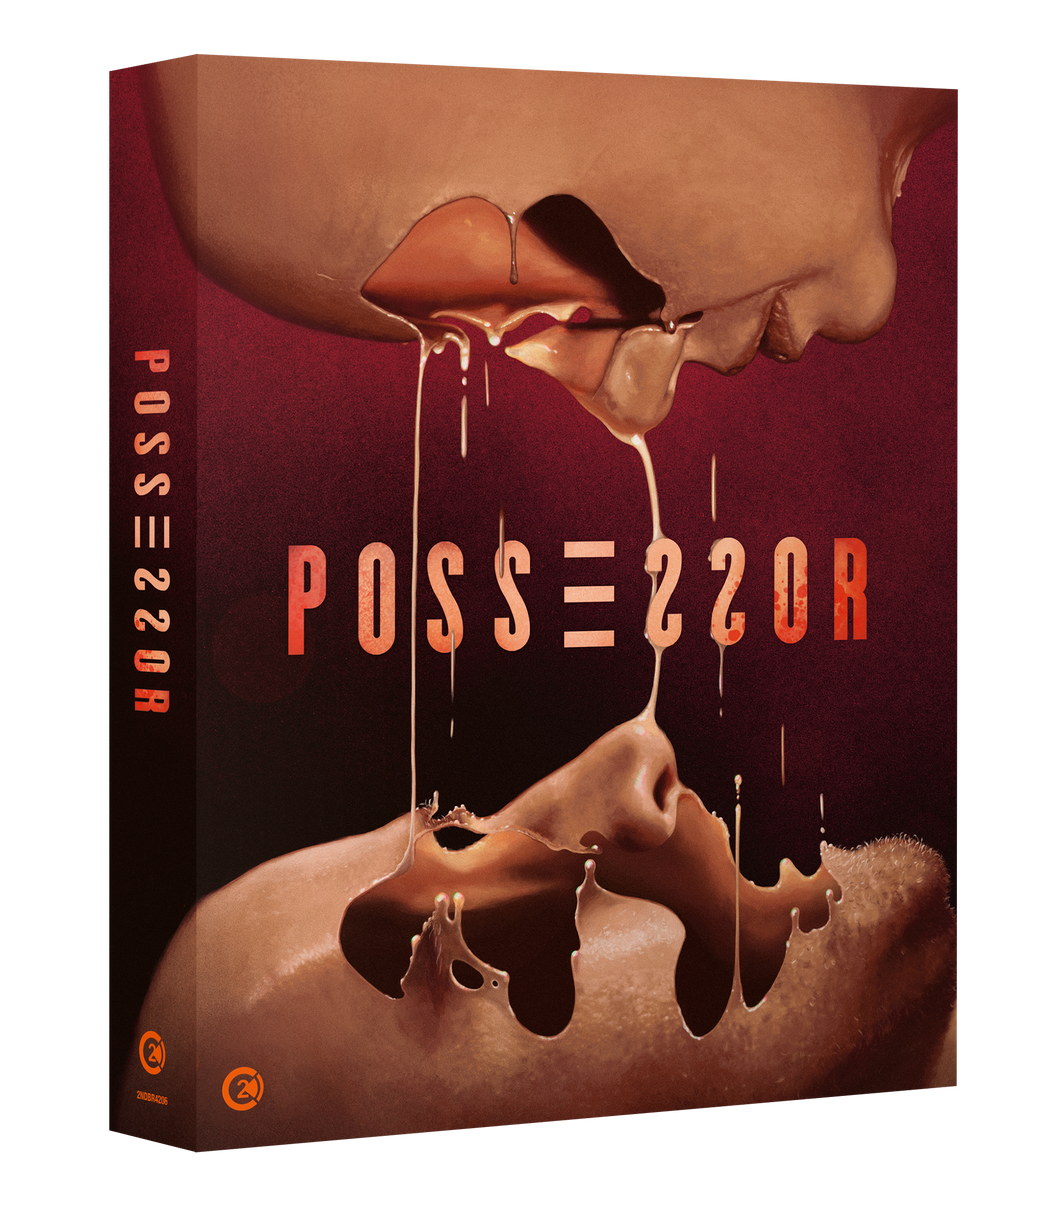 Possessor Limited Edition 4K UHD & Blu-ray: Pre-Order Available March 18th